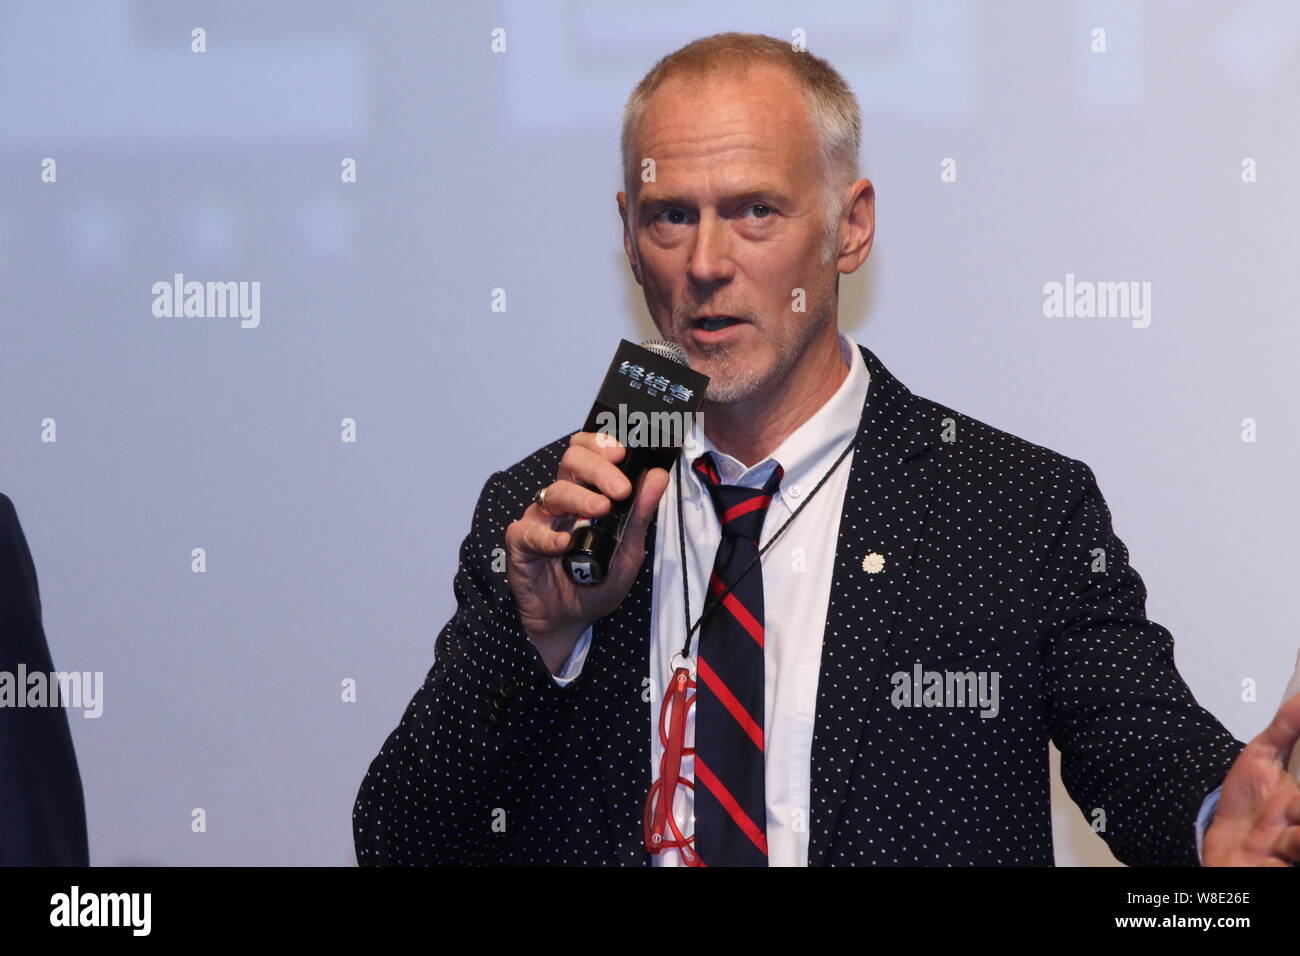 American director Alan Taylor speaks during a premiere for his movie 'Terminator Genisys' in Shanghai, China, 19 August 2015. Stock Photo